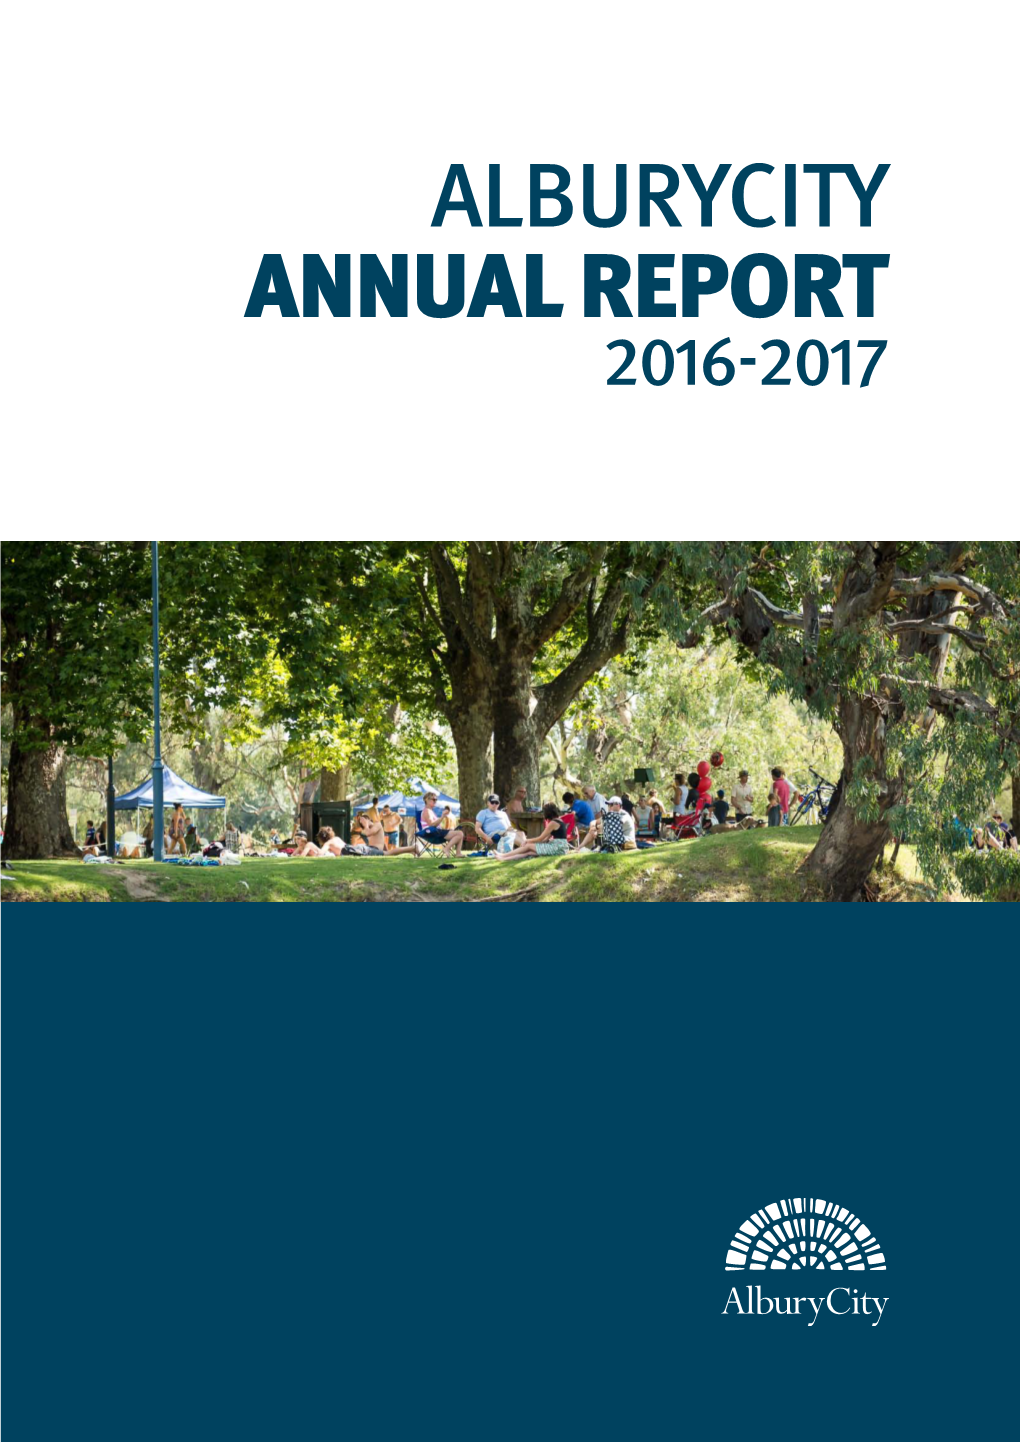 ALBURYCITY ANNUAL REPORT 2016-2017 ALBURYCITY ANNUAL REPORT 2016-2017 2 Table of Contents